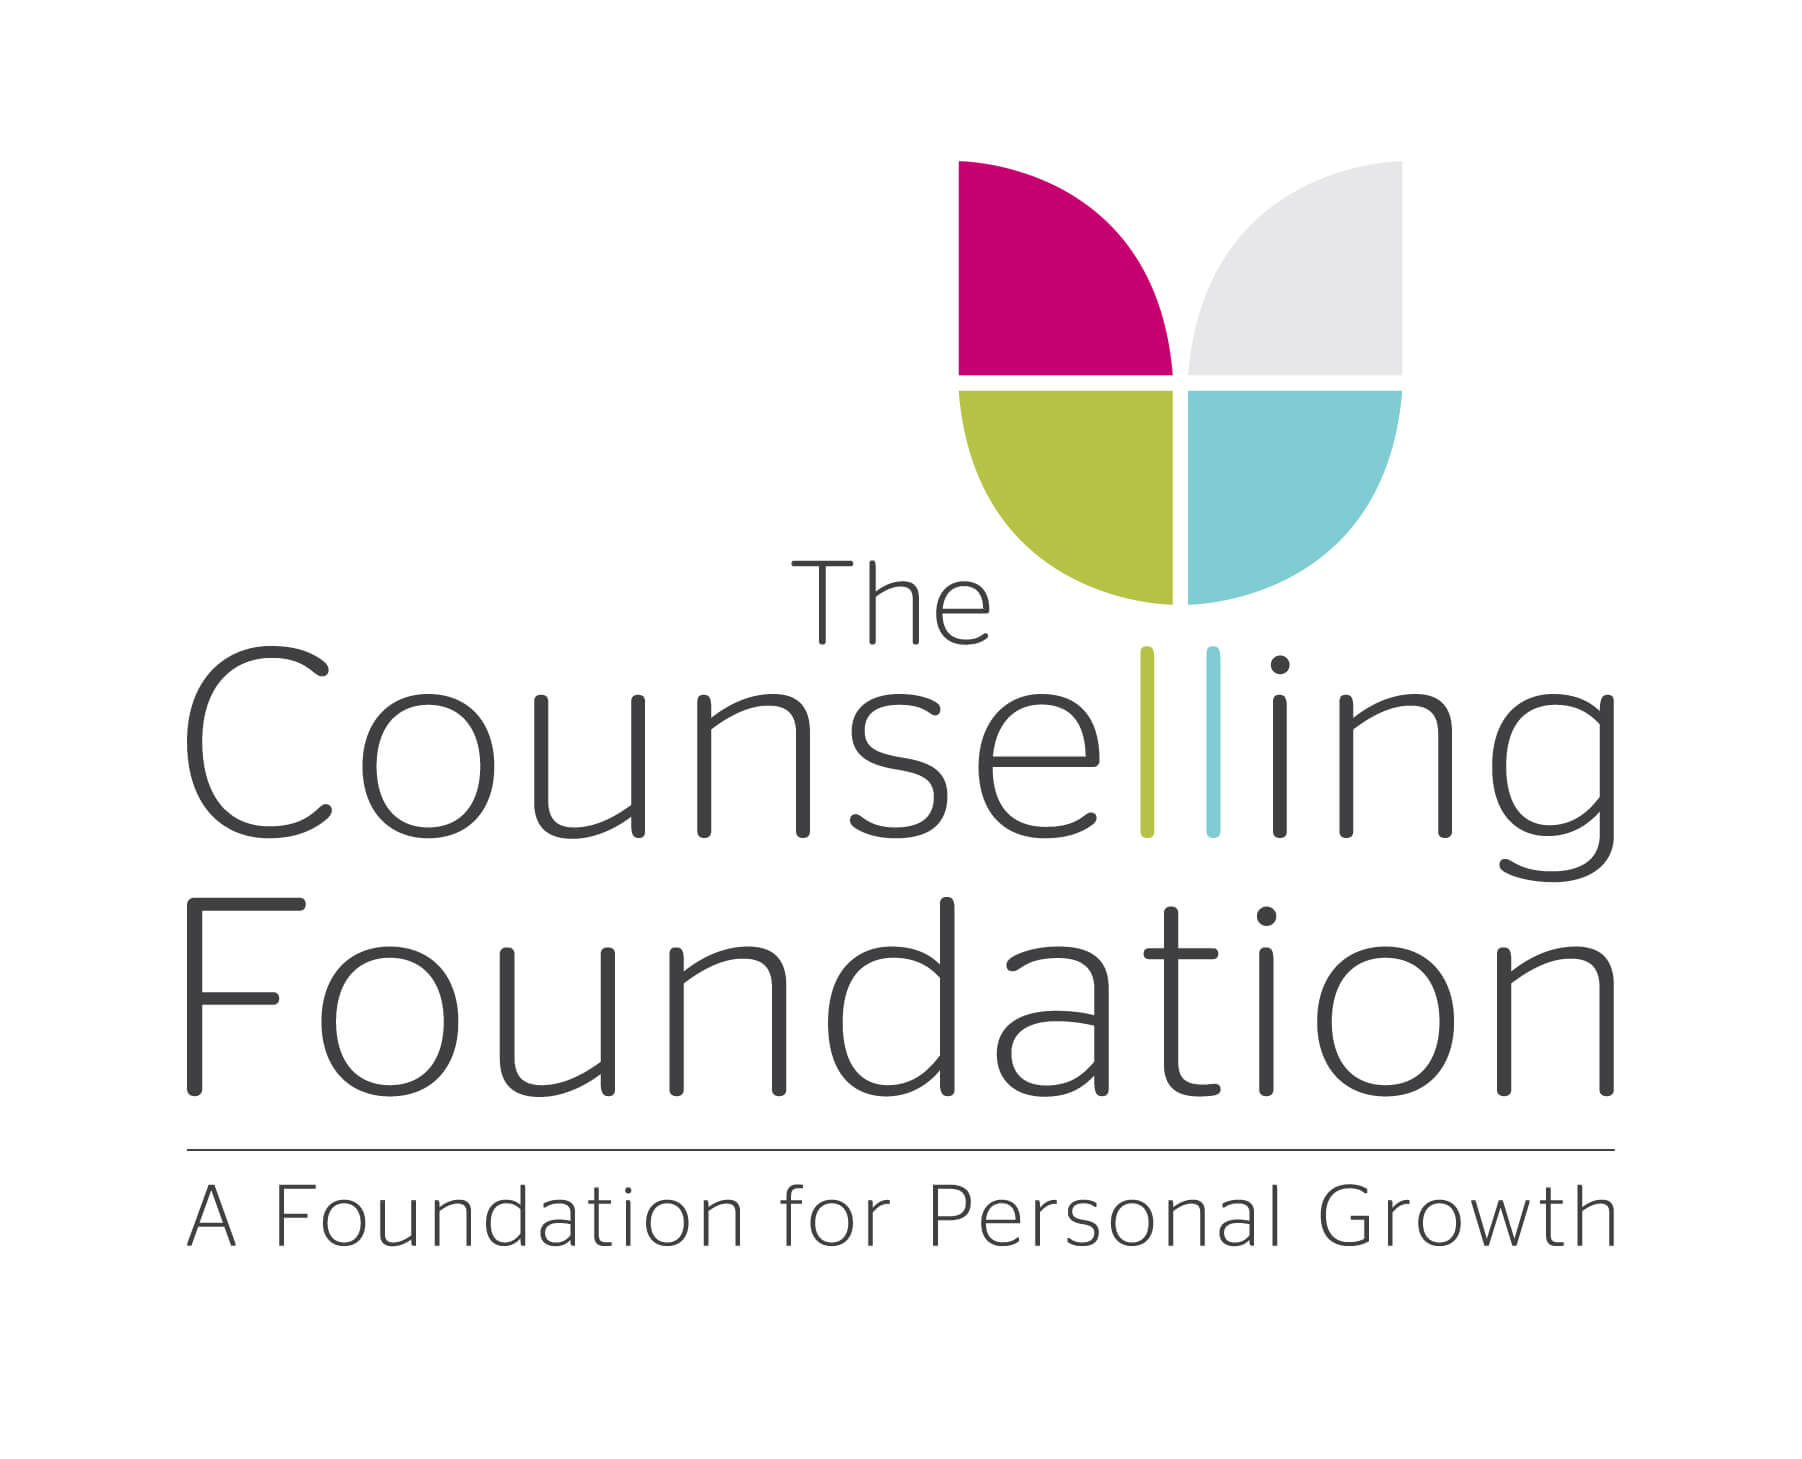 The Counselling Foundation; Atlas Translations; St Albans; London; Clare Suttie